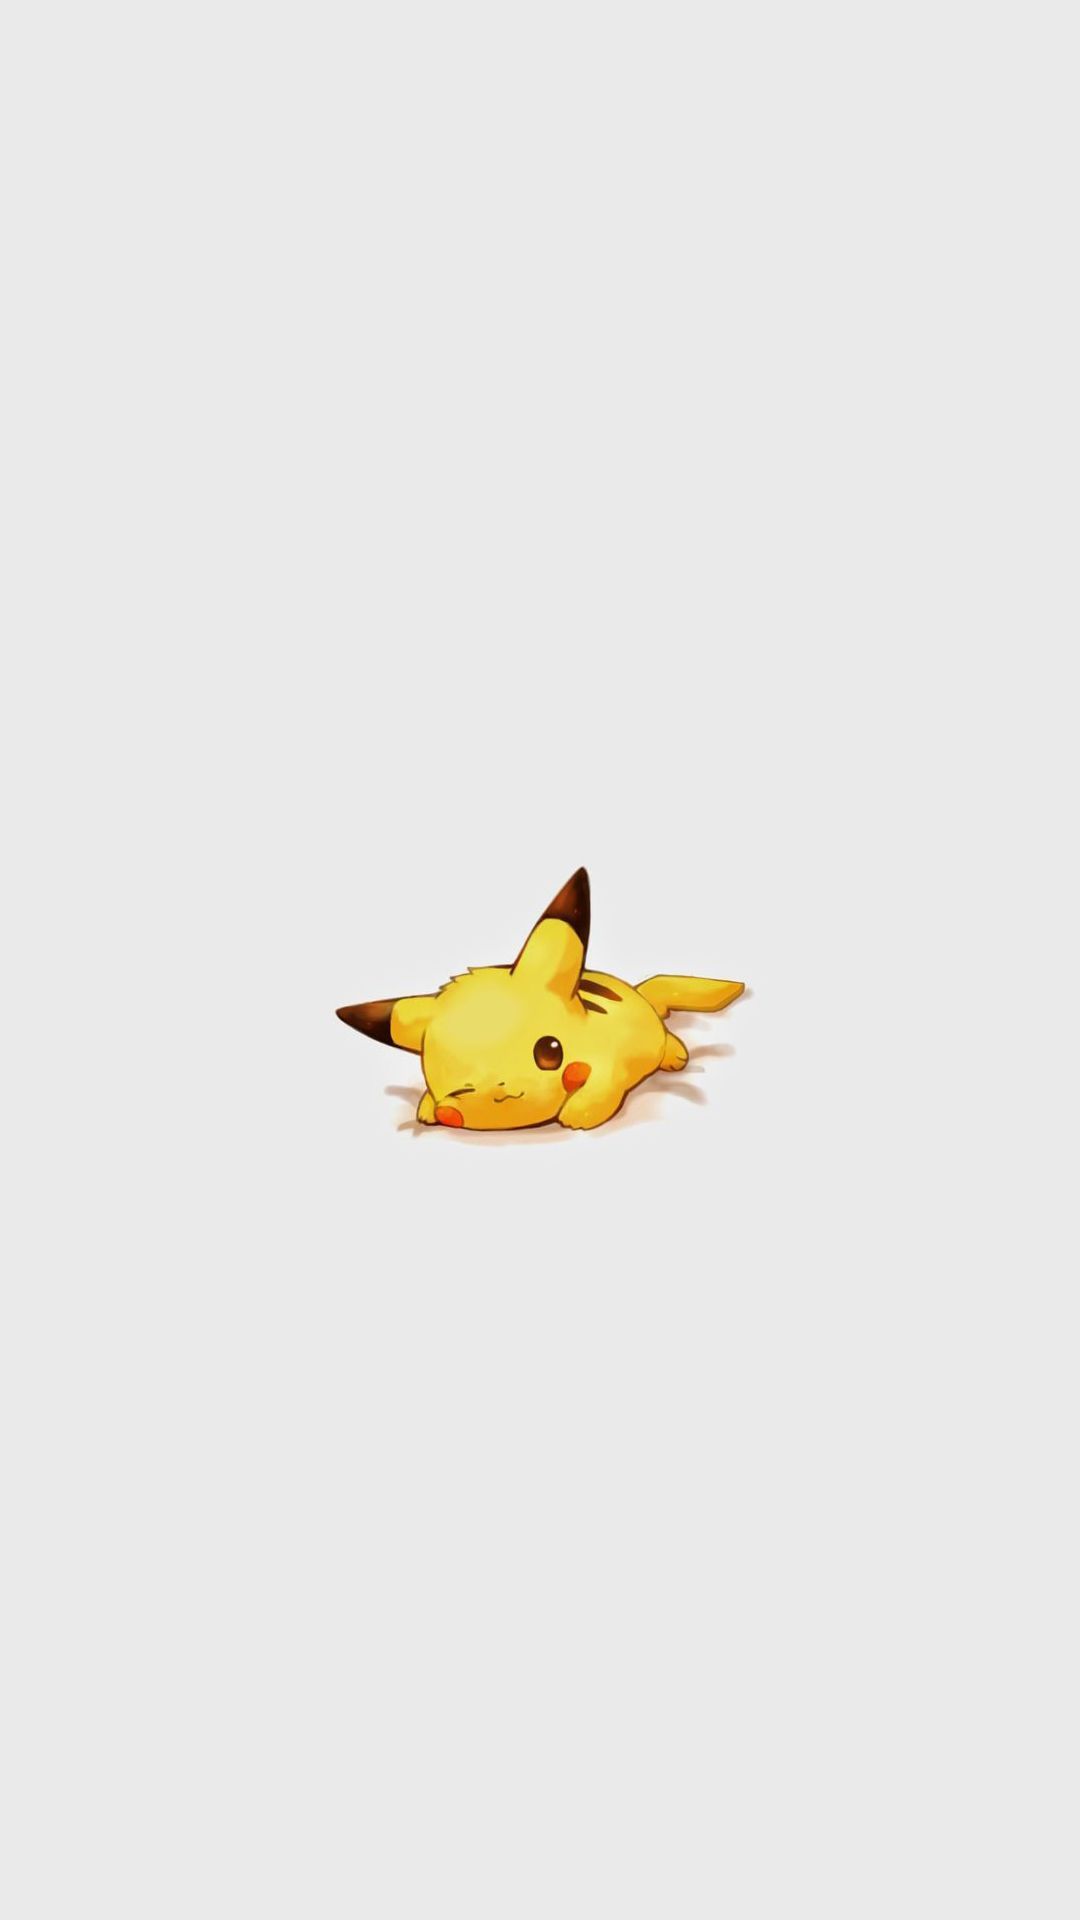 Free download the Cute Pikachu Pokemon Character wallpaper , beaty your iphone. #cute #characters #lovely. Pikachu wallpaper, Cute pokemon wallpaper, Pikachu art